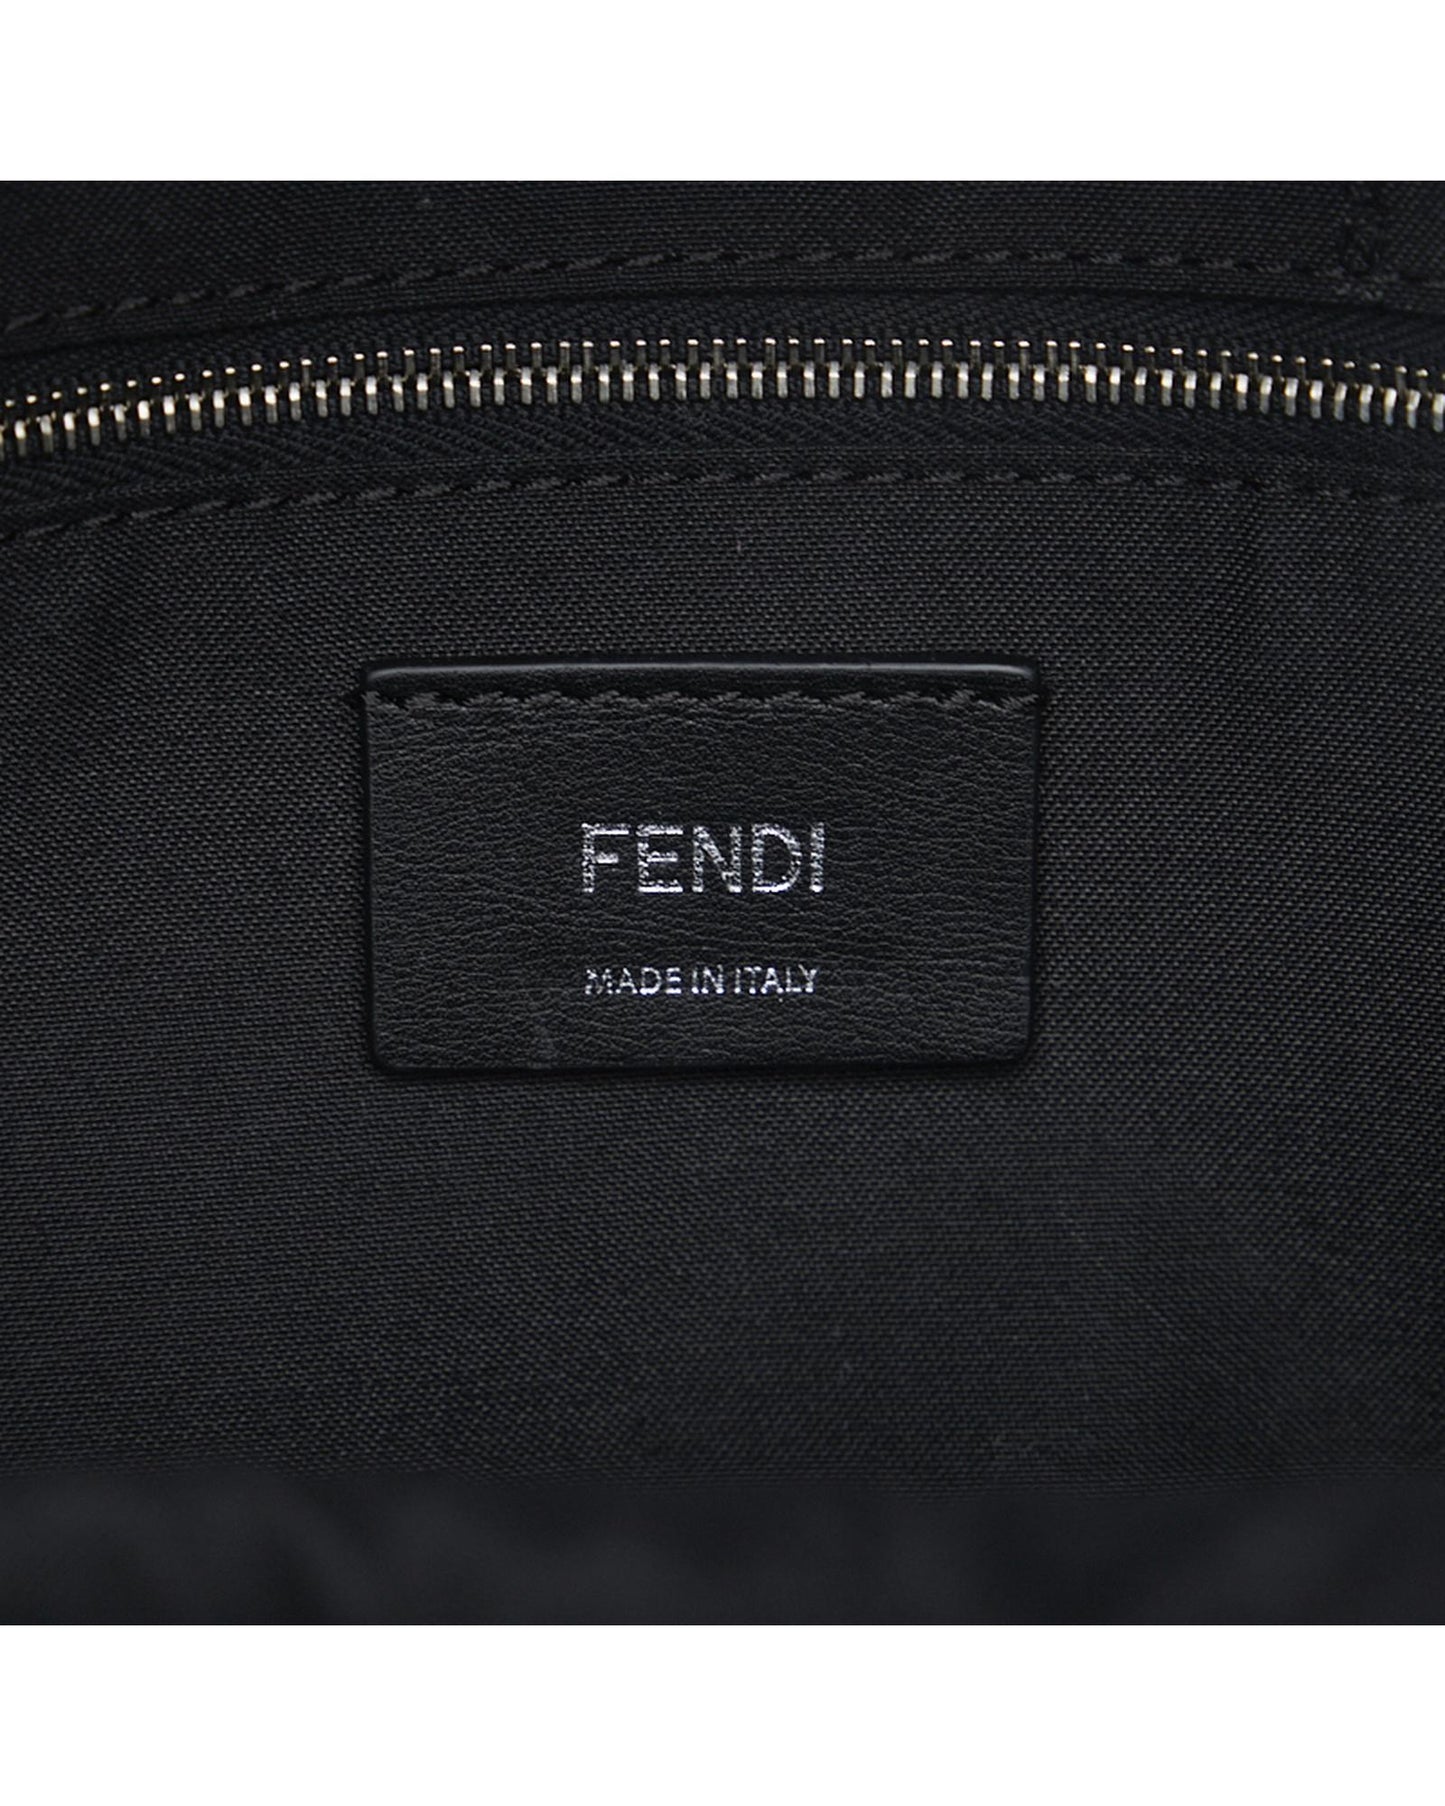 Fendi Women's Mini Leather Backpack Bag in Excellent Condition in Black